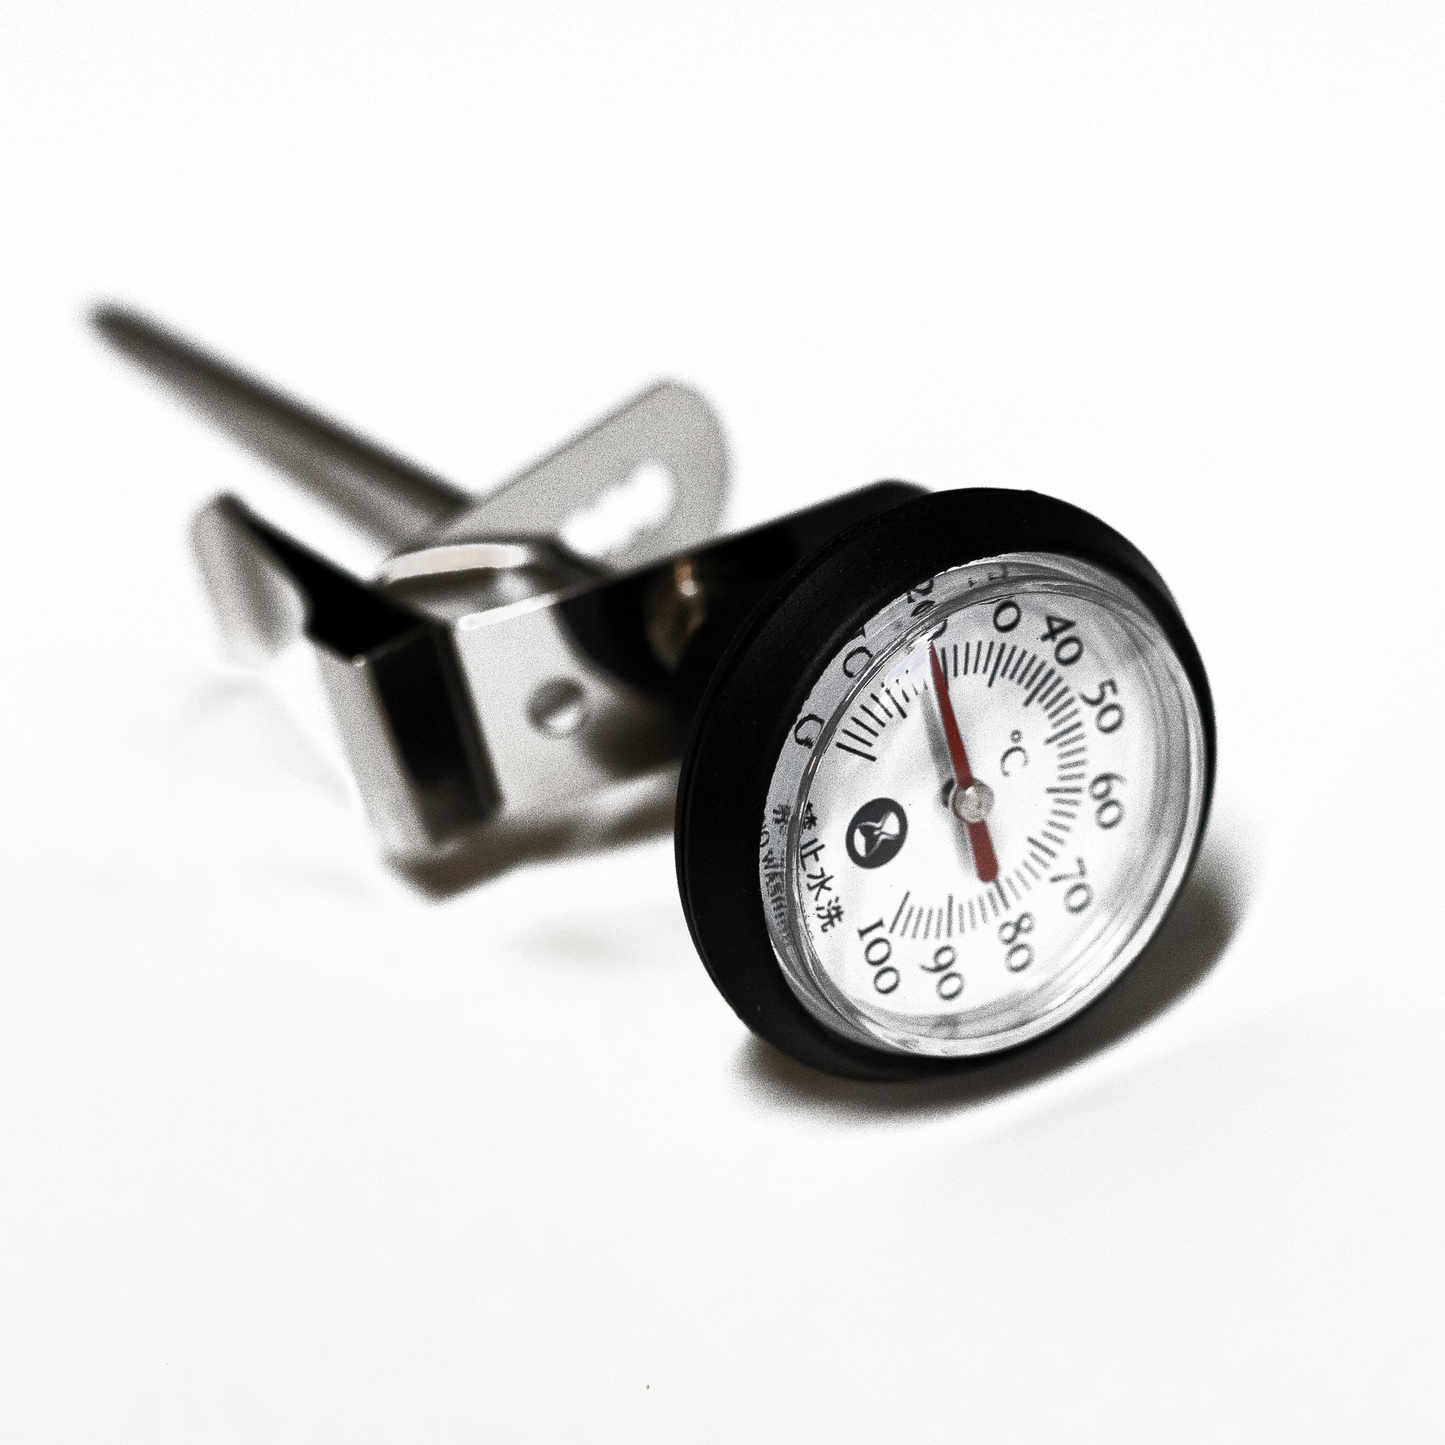 Timemore Analogue Thermometer